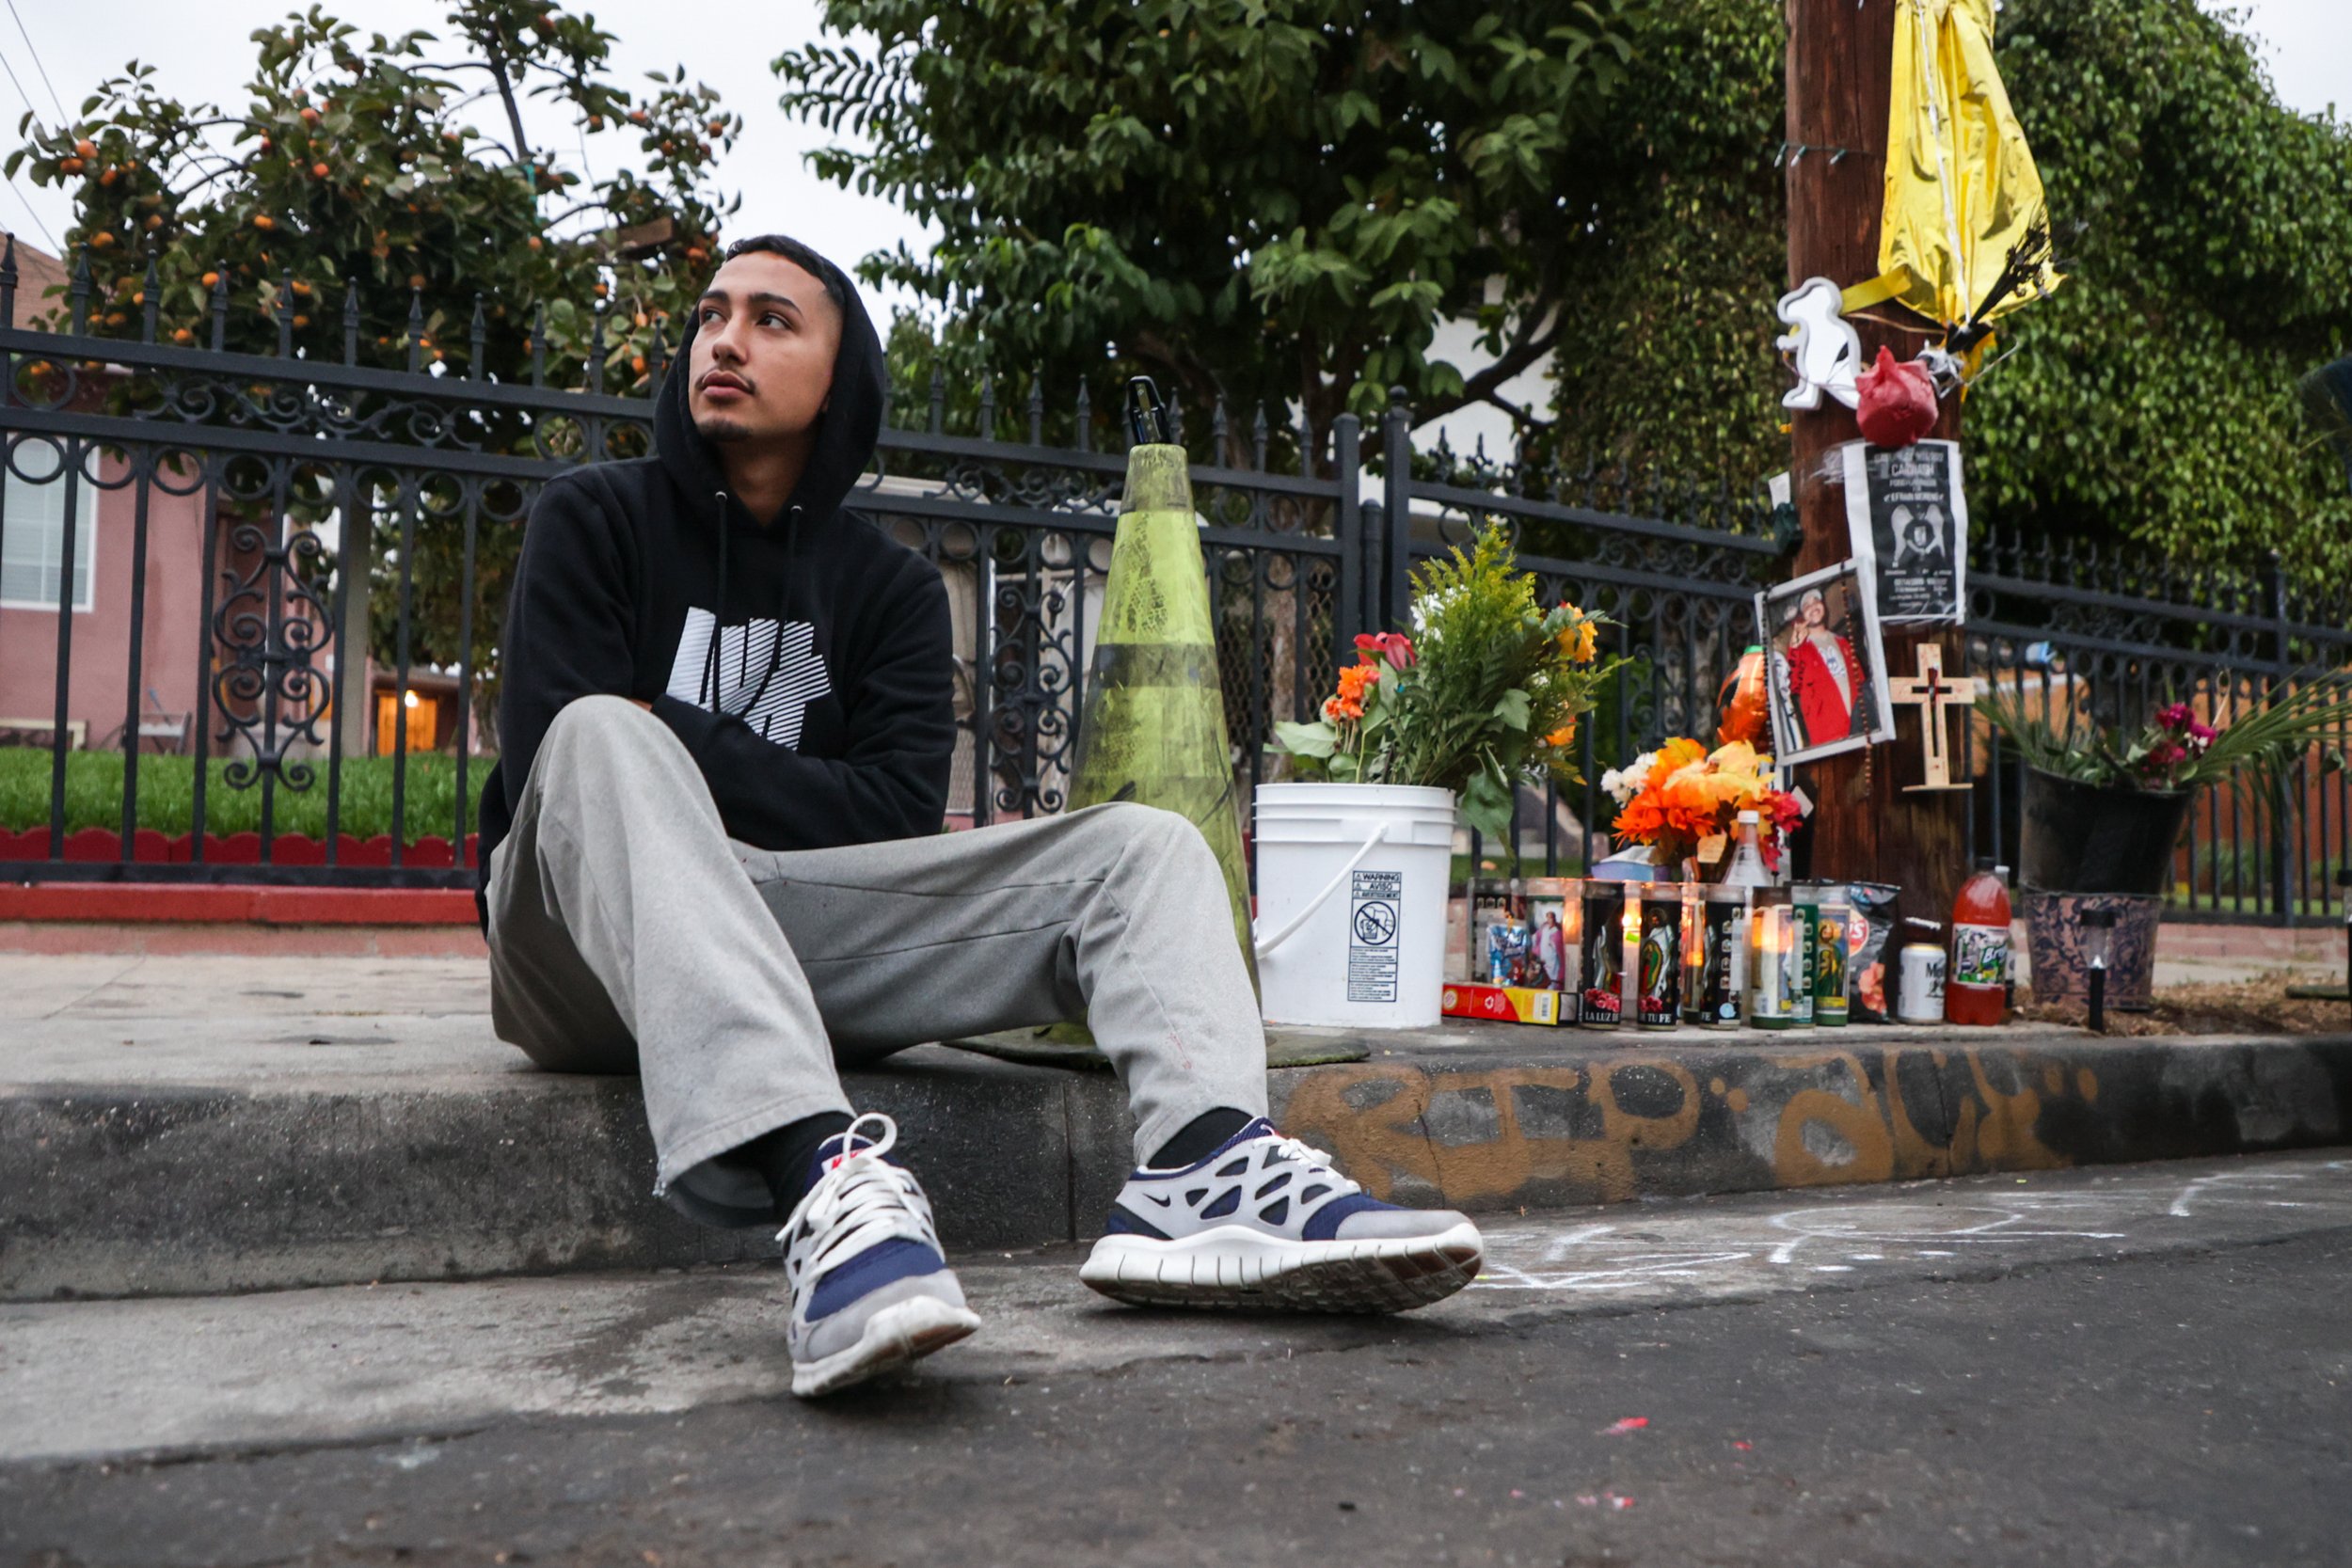  Fernando Aguilera poses for a portrait on October 14, 2022, sitting on the curb where his best friend died. Aguilera was in the car when his best friend Efrain Moreno Jr. was fatally shot and killed. Aguilera, on the one-month anniversary of Moreno'